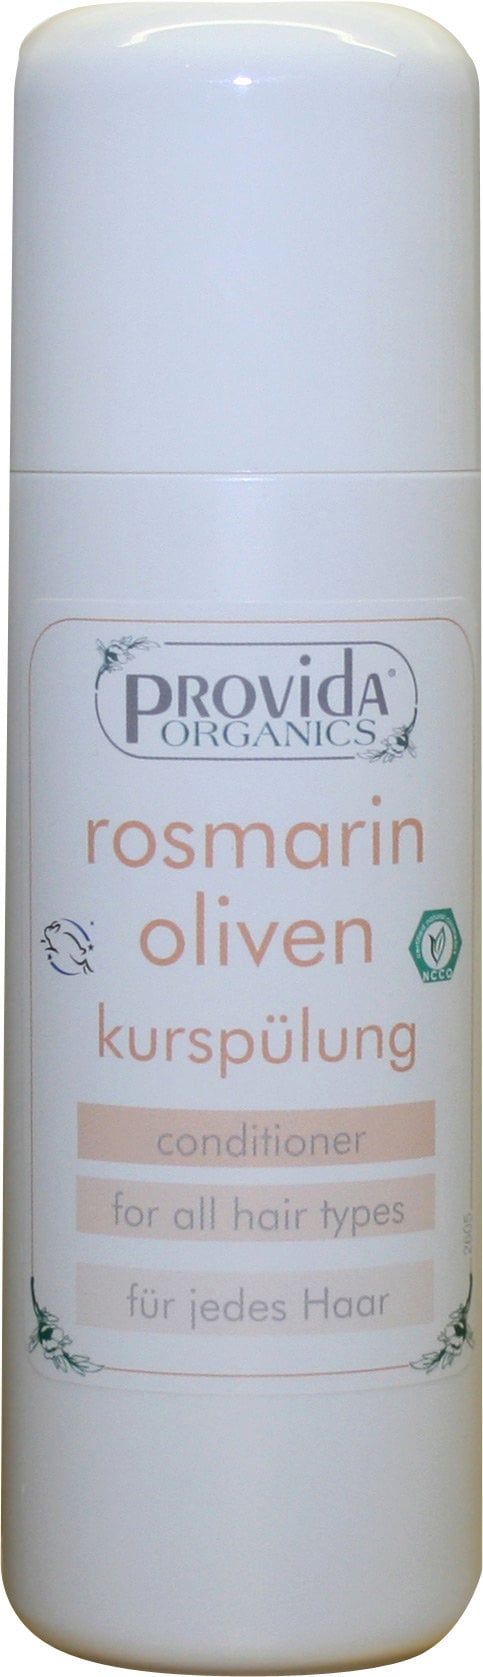 Rosemary and Olive Conditioning Treatment